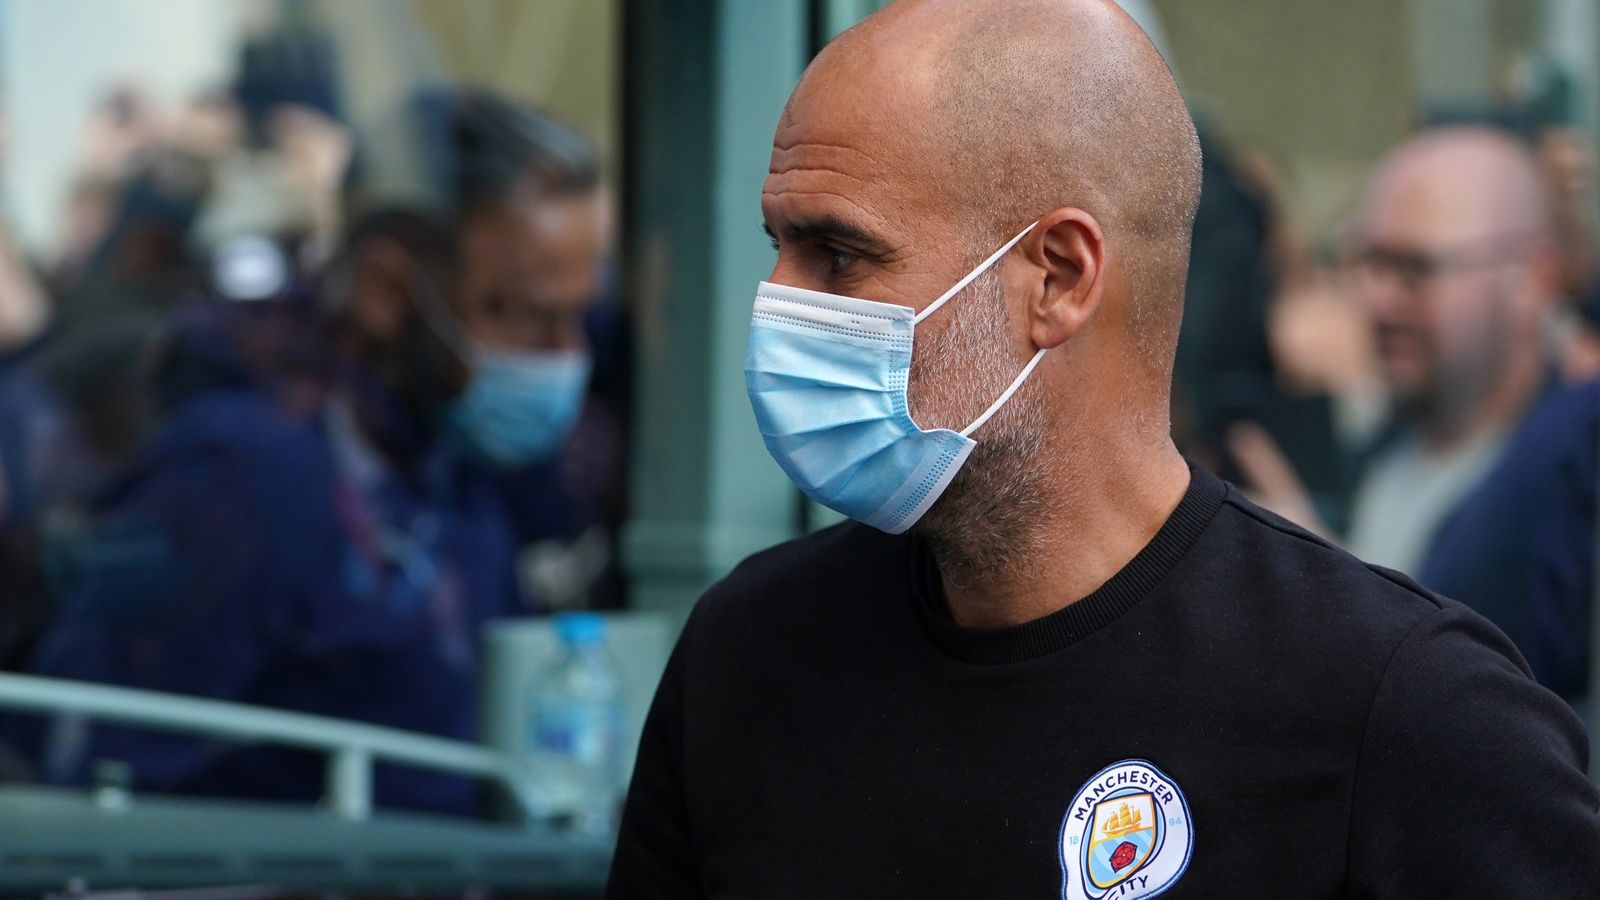 Pep Guardiola urges fans to use masks in stadiums to limit spread of coronavirus